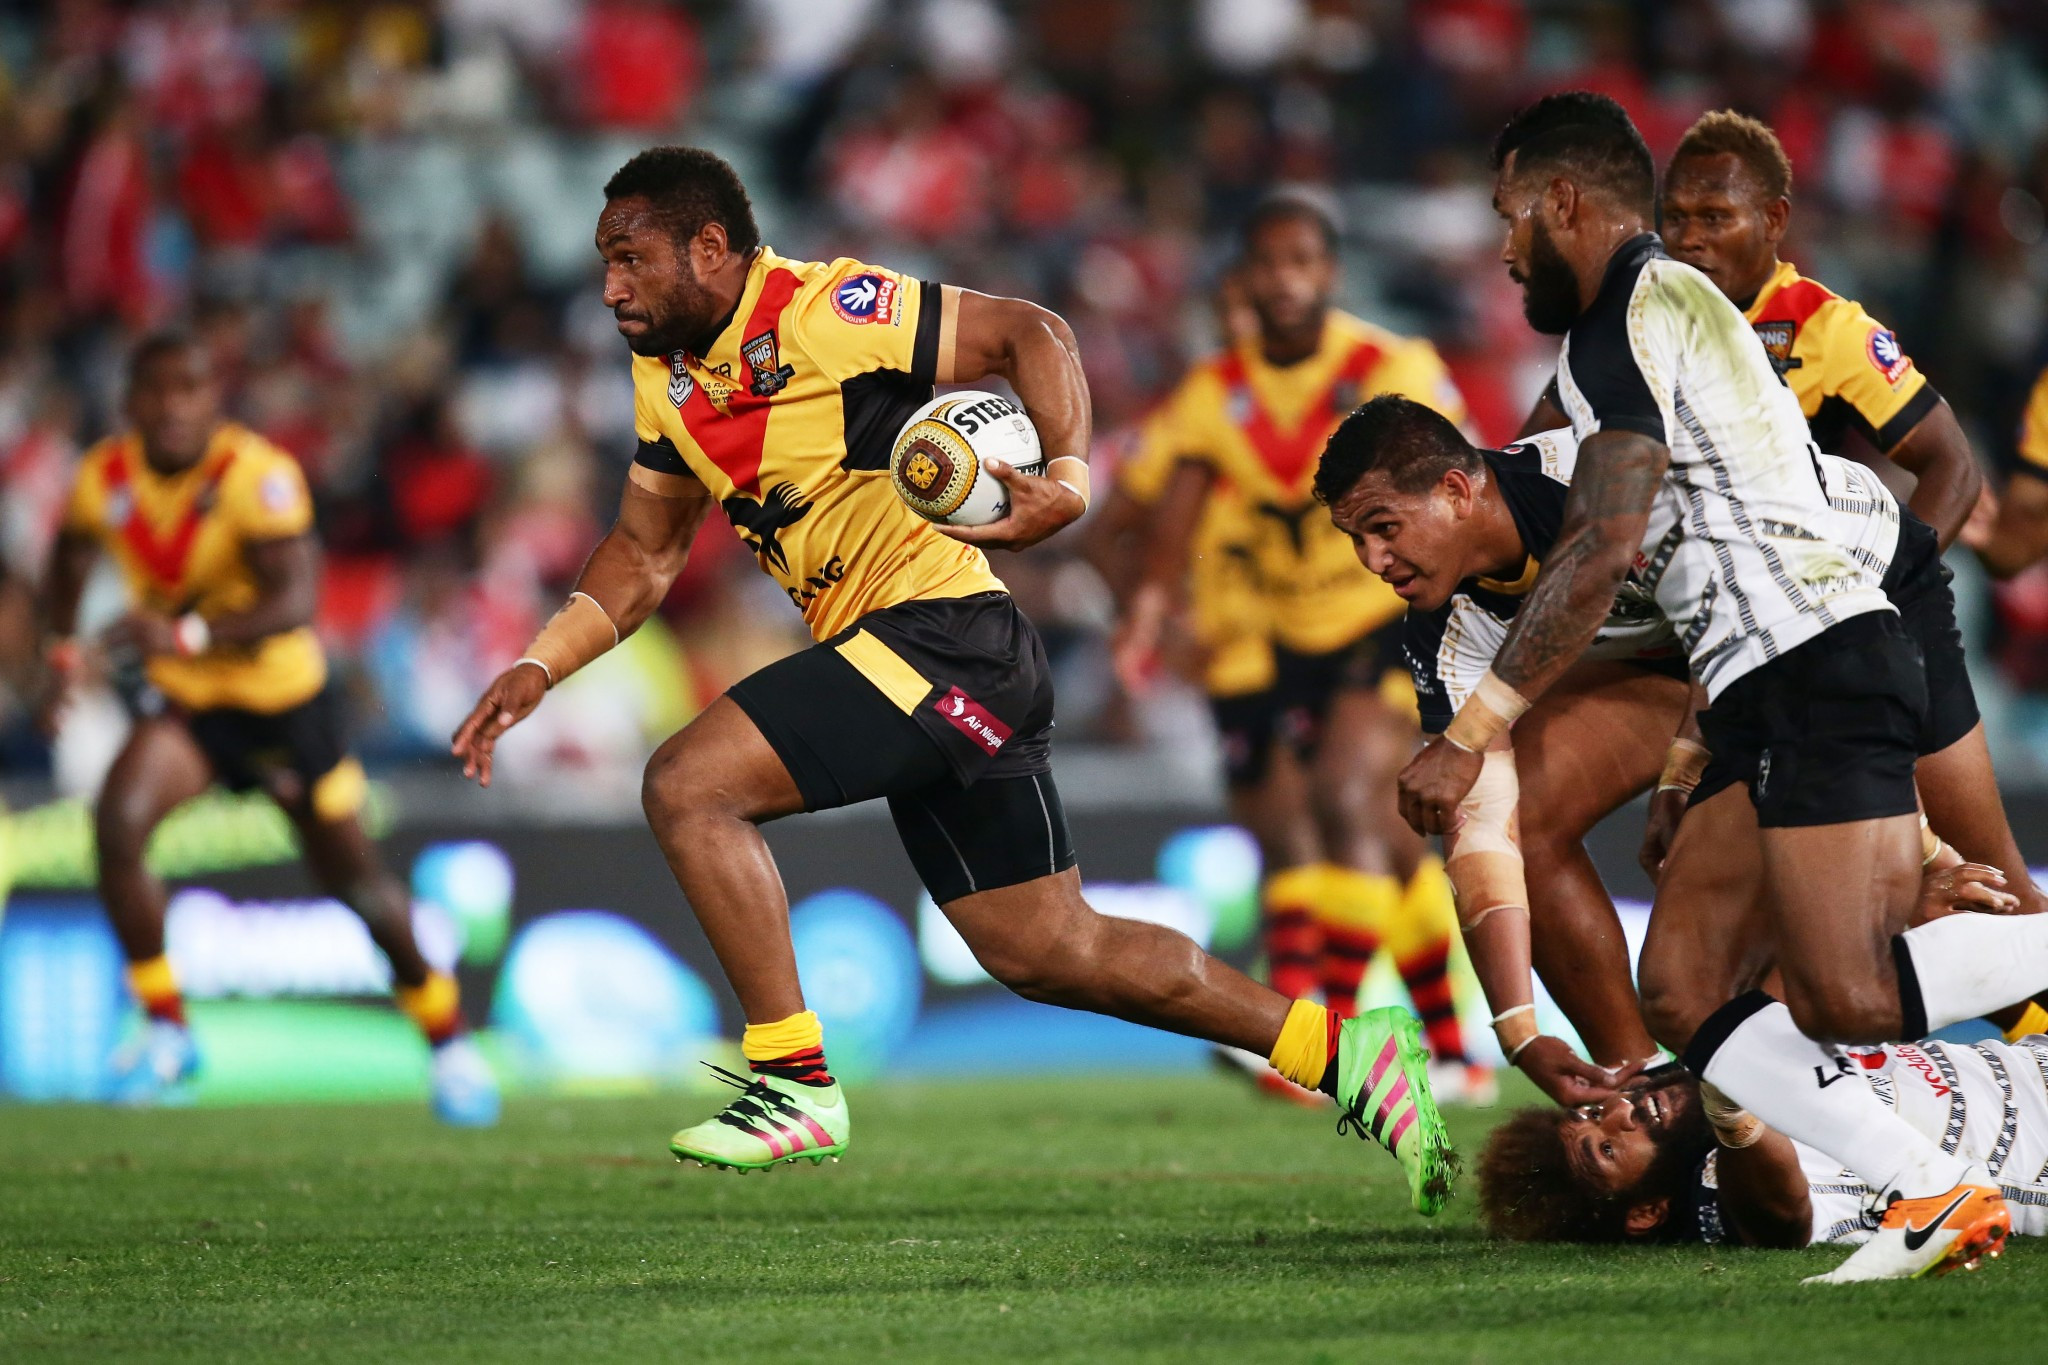 Papua New Guinea will host three games in the group phase of the tournament ©Getty Images